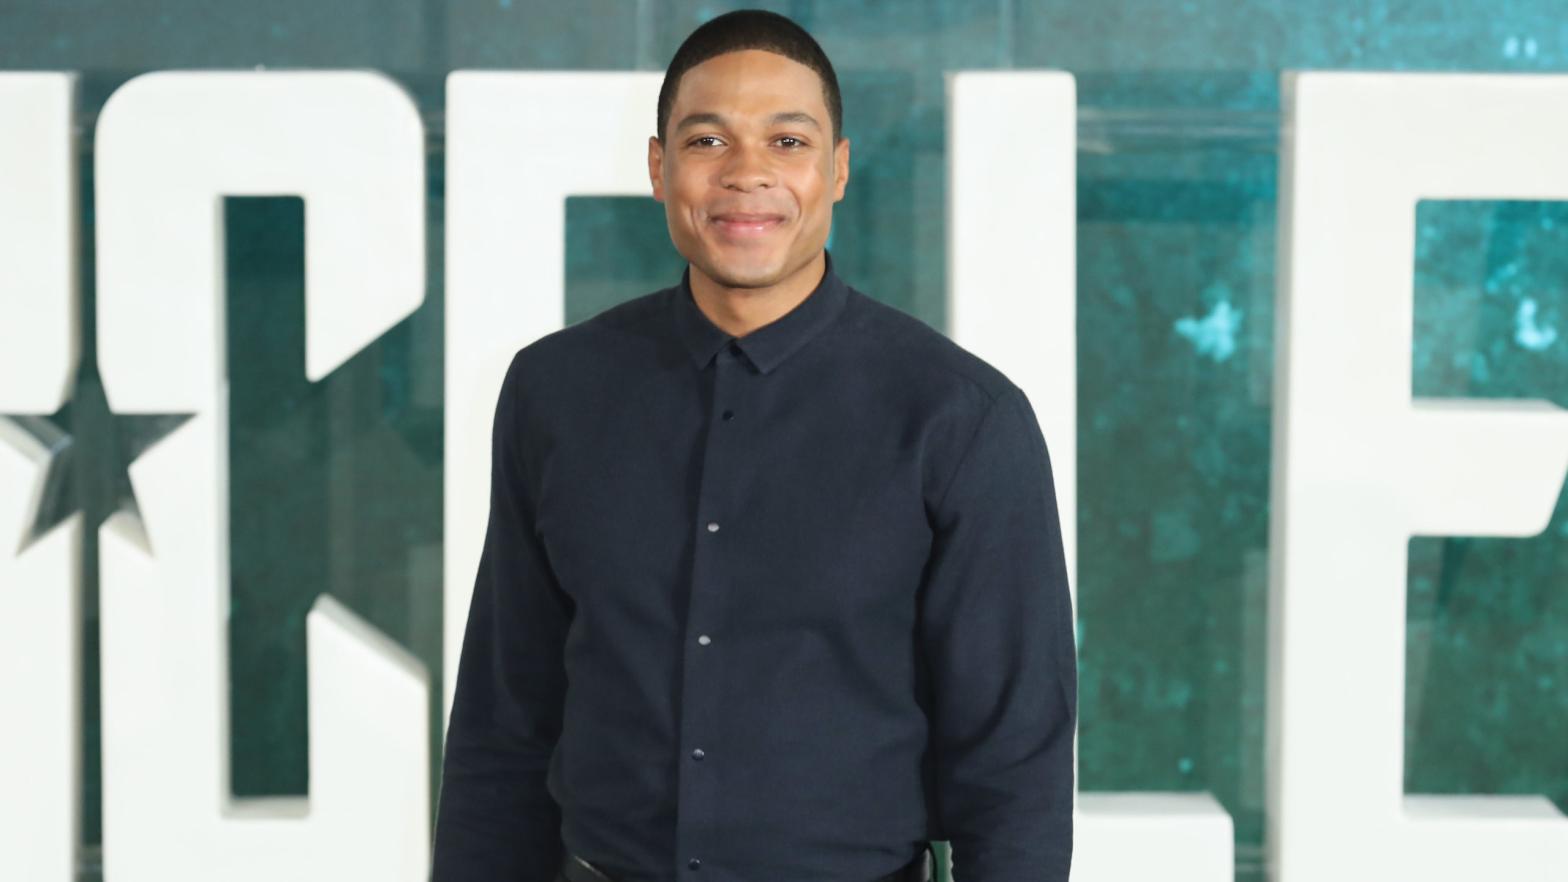 Ray Fisher at a Justice League event in 2017. (Photo: Tim P. Whitby/Getty Images, Getty Images)